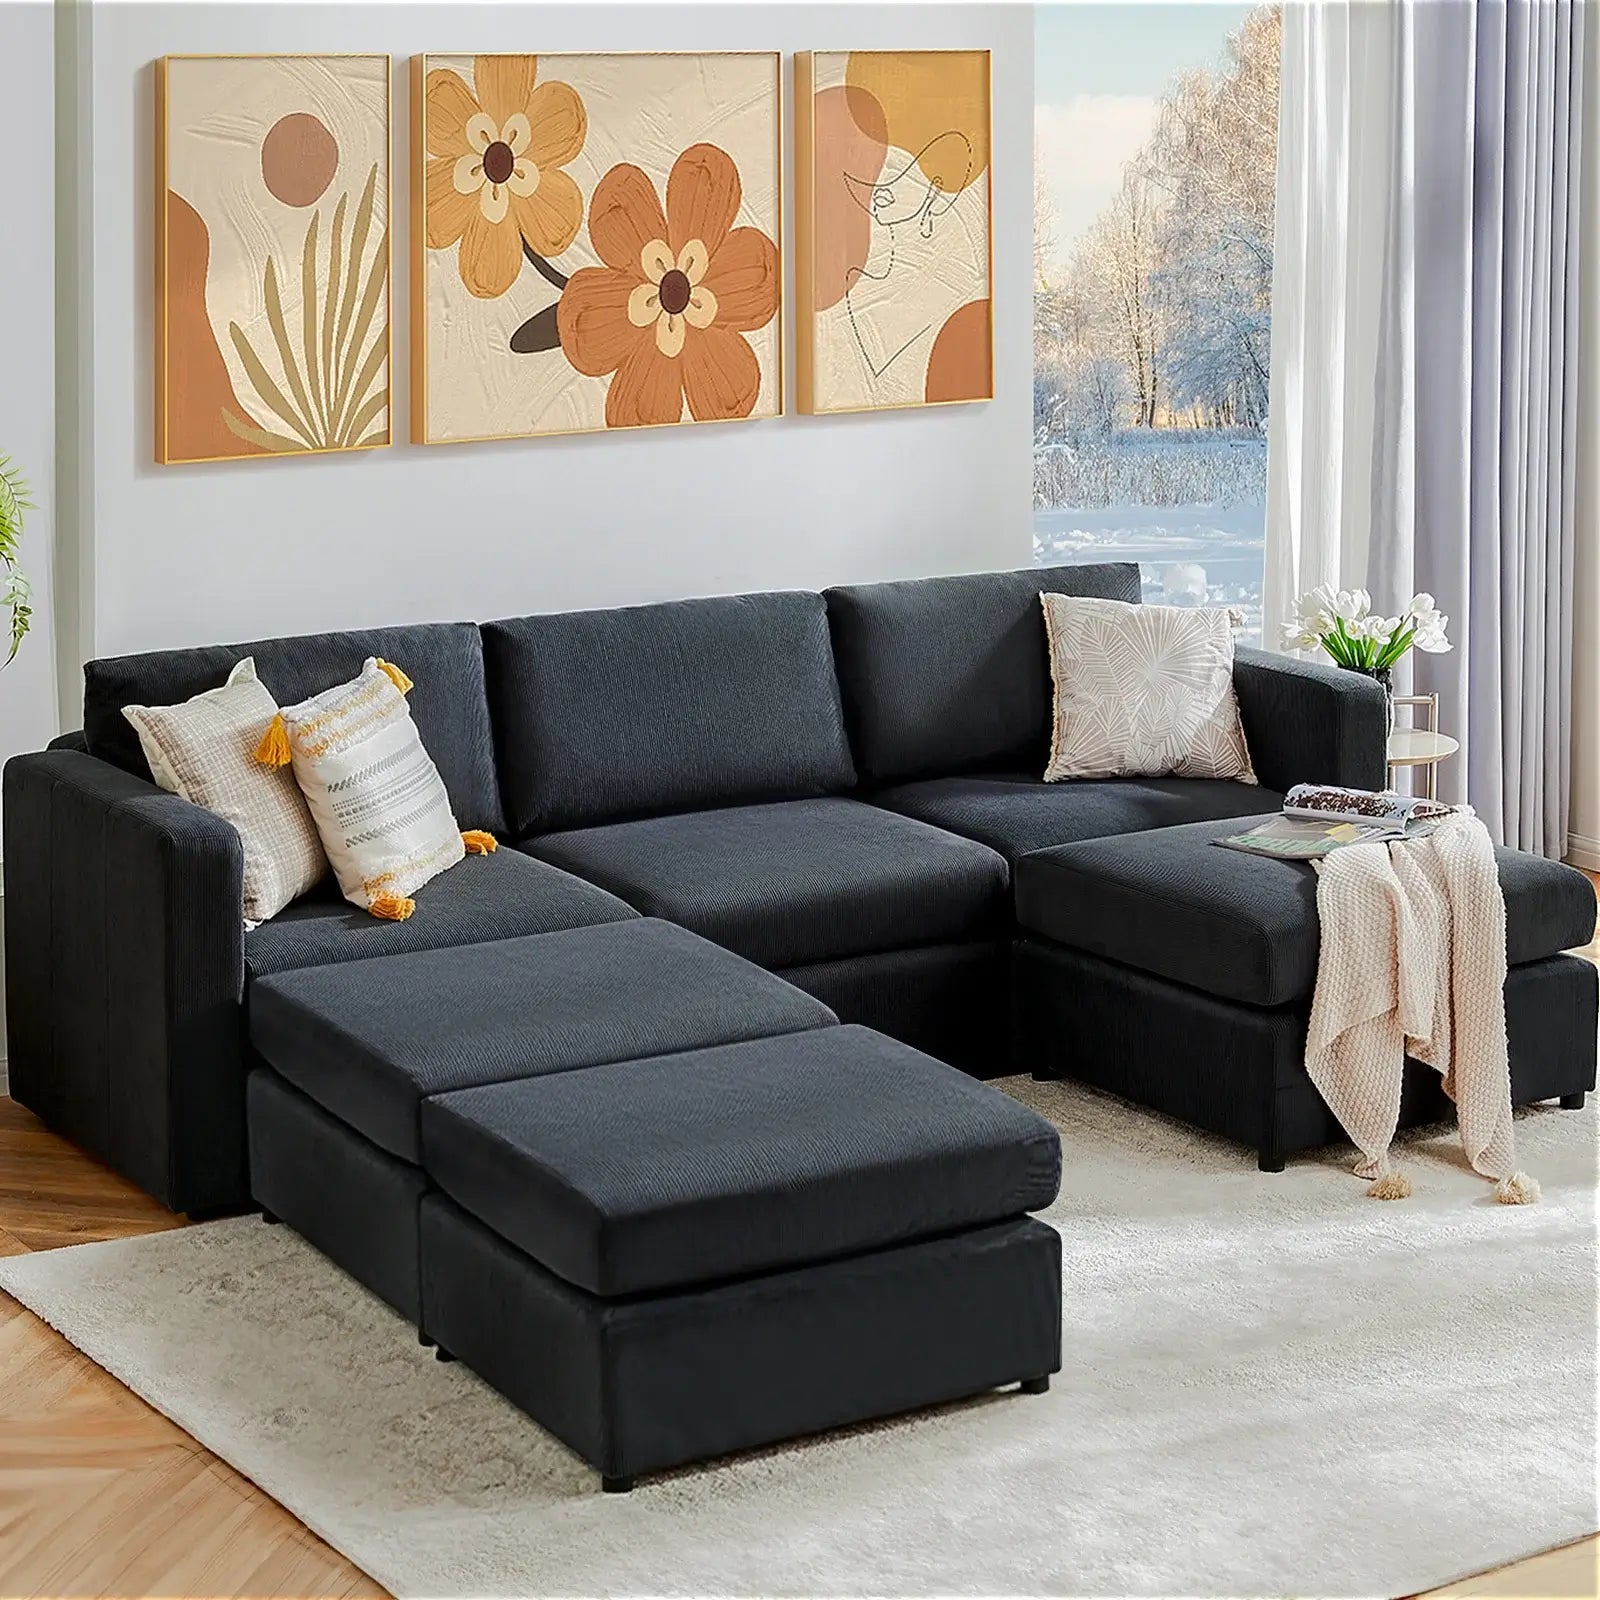 Convertible Sleeper Sofa Bed - Modular Sectional Sofa Set for Living Room, for office, living room, bedroom